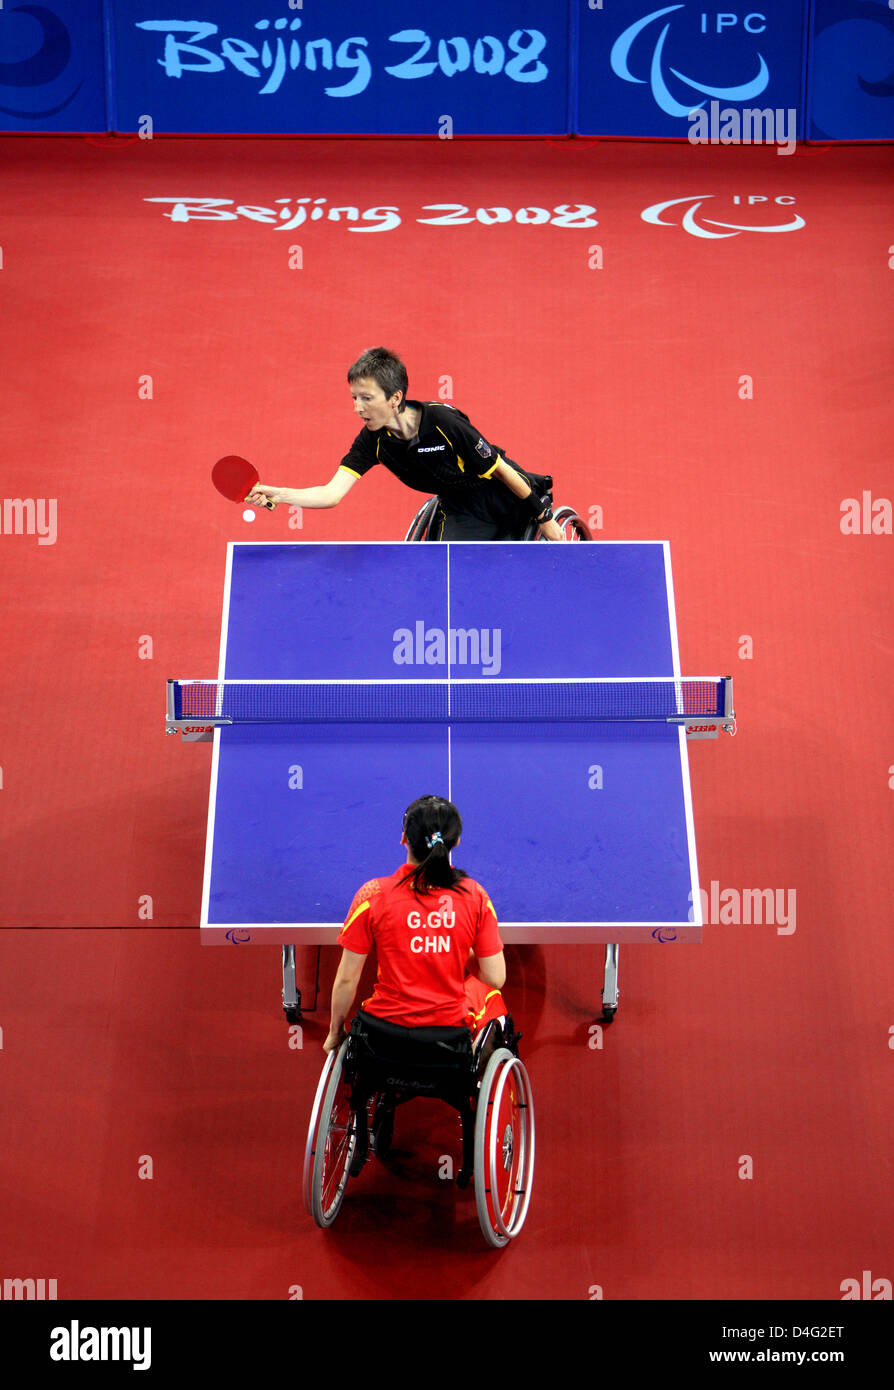 German table tennis player Andrea Zimmerer (top) defeats Chinese Gai Gu during the finals of the 13th Paralympic Games in Beijing, China, 16 September 2008. China won the gold medal. Photo: Rolf Vennenbernd Stock Photo